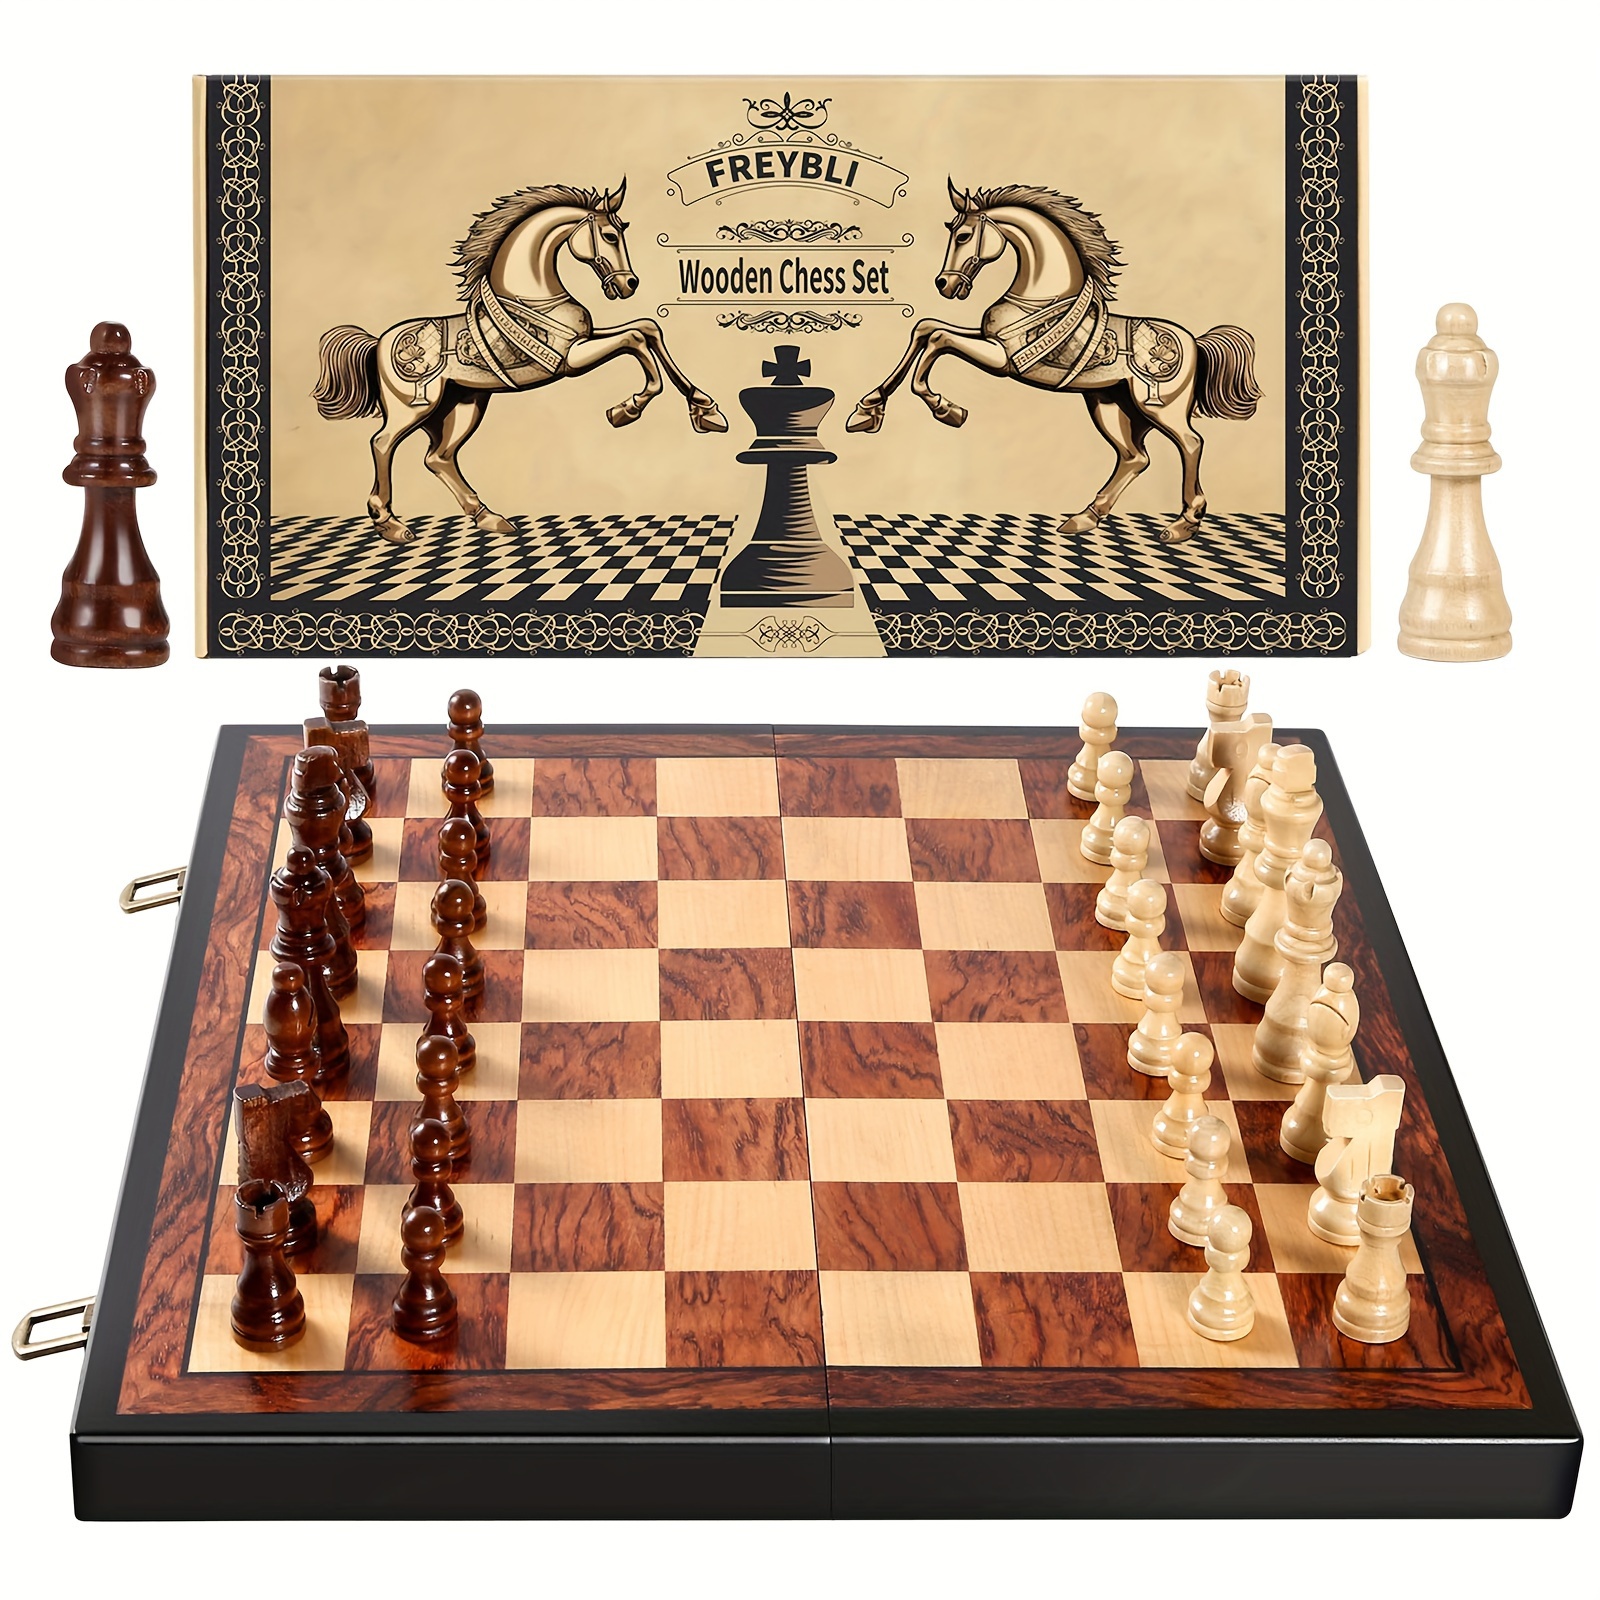 

Wooden Chess Board Set With Manual For Adults And Kids Professional - 15" Chess Set With Handmade Pieces, Folding Portable Travel Unique Chess Game For Beginner